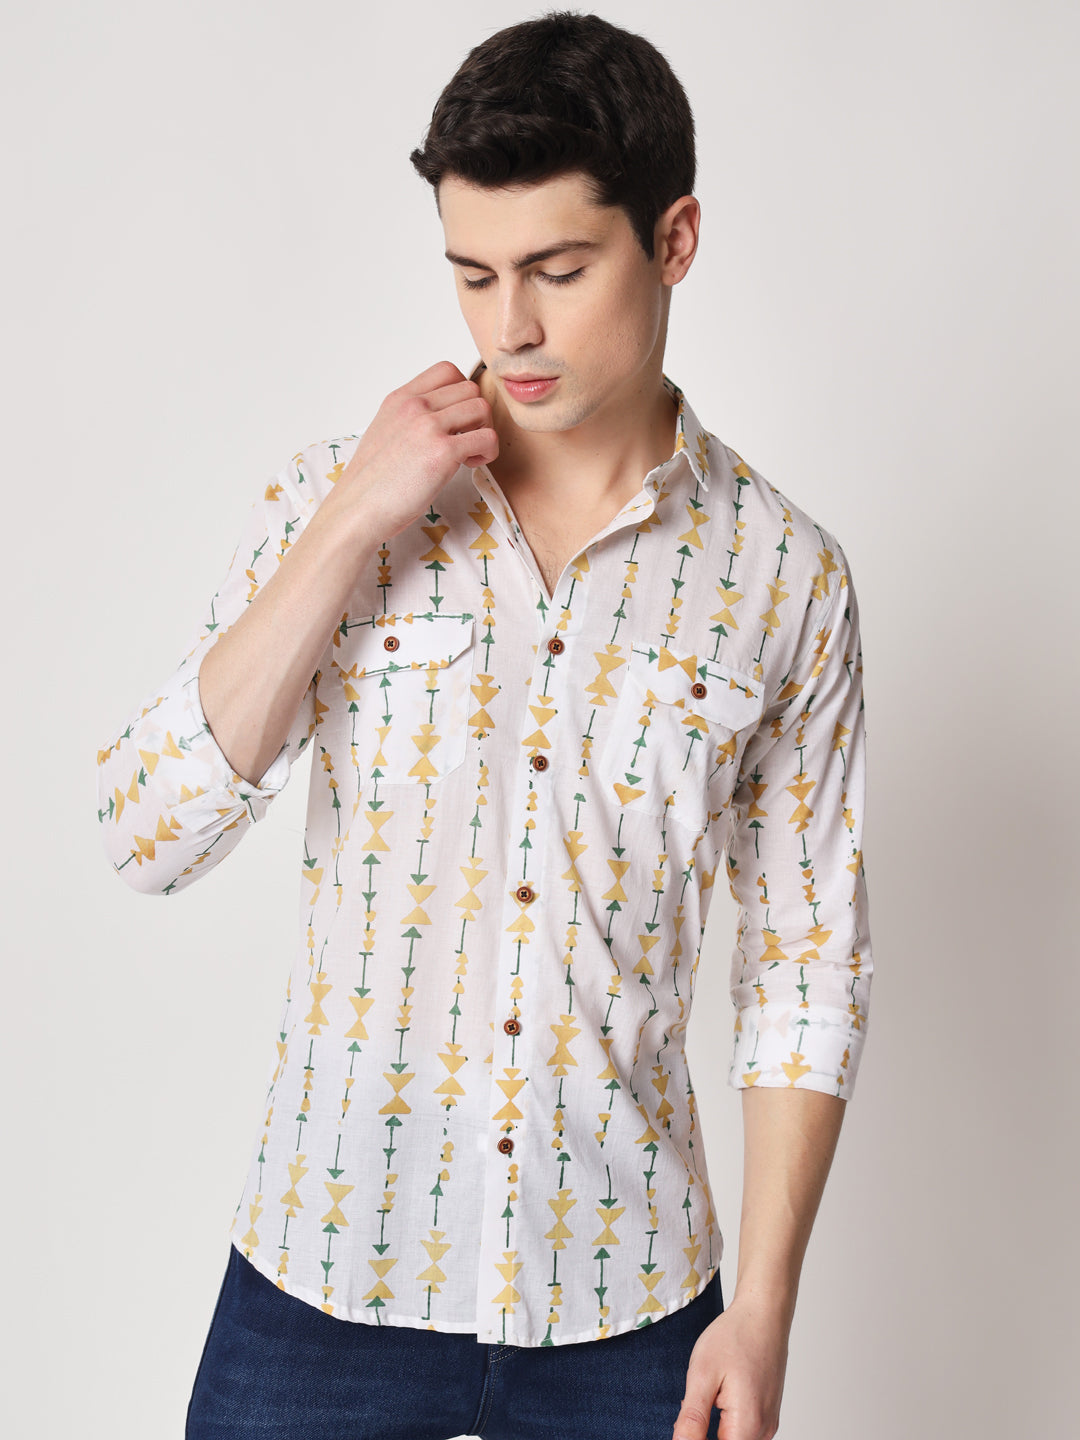 Firangi Yarn 100% Cotton Block Geomatric Printed Casual Full Sleeves With Flap Pockets Men's Party Wear Shirt